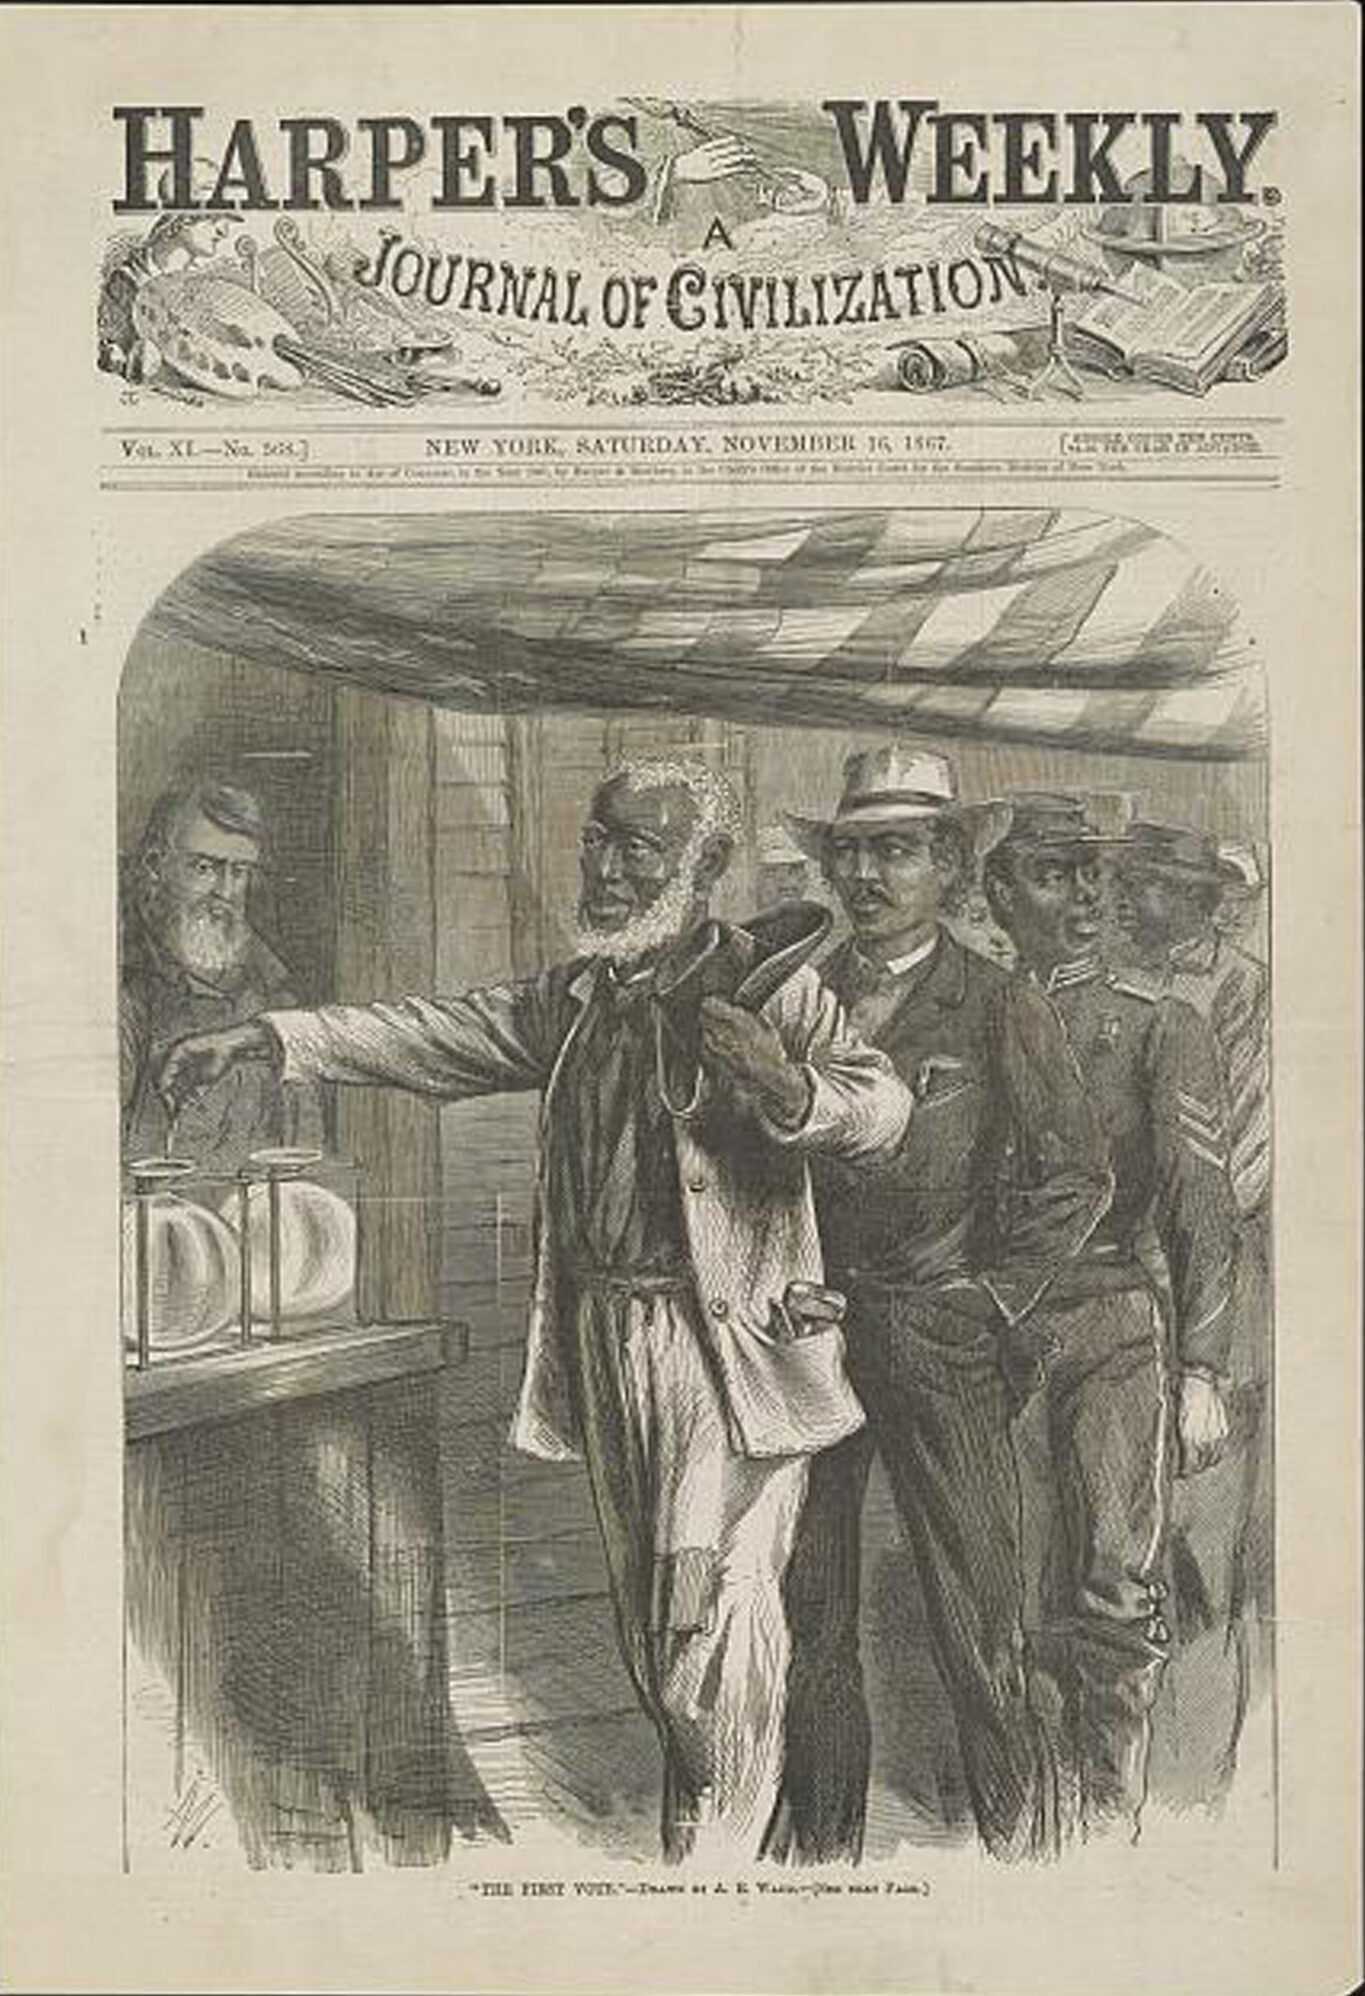 Illustration of "The First Vote,” from Harper's Weekly